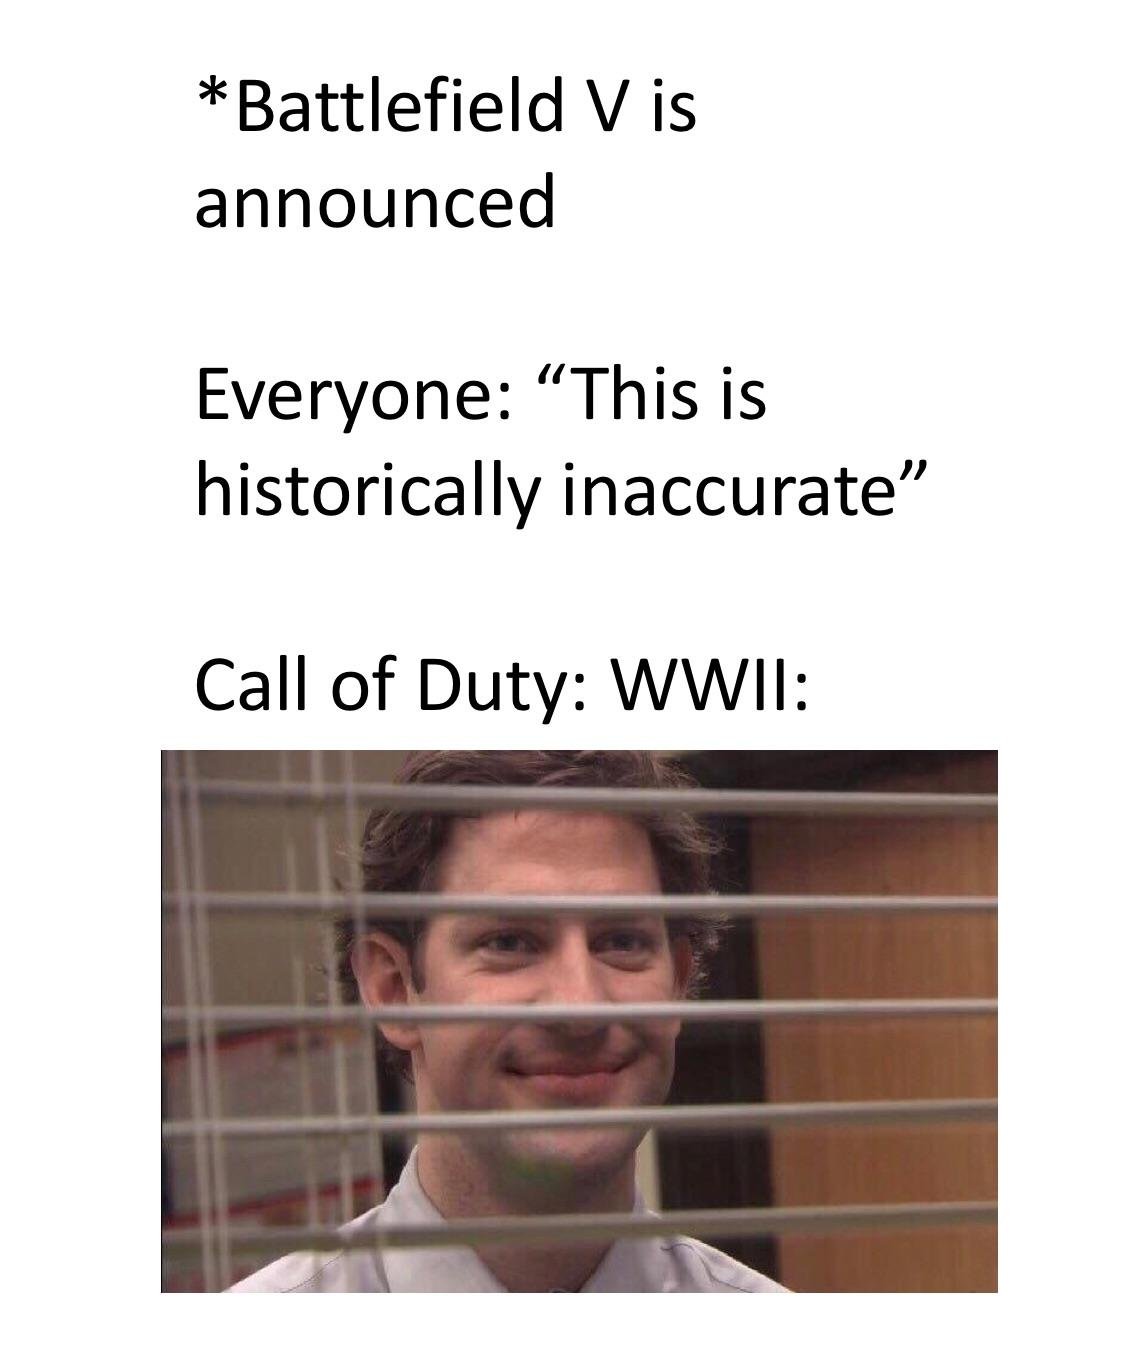 historically inaccurate meme - Battlefield V is announced Everyone This is historically inaccurate" Call of Duty Wwii